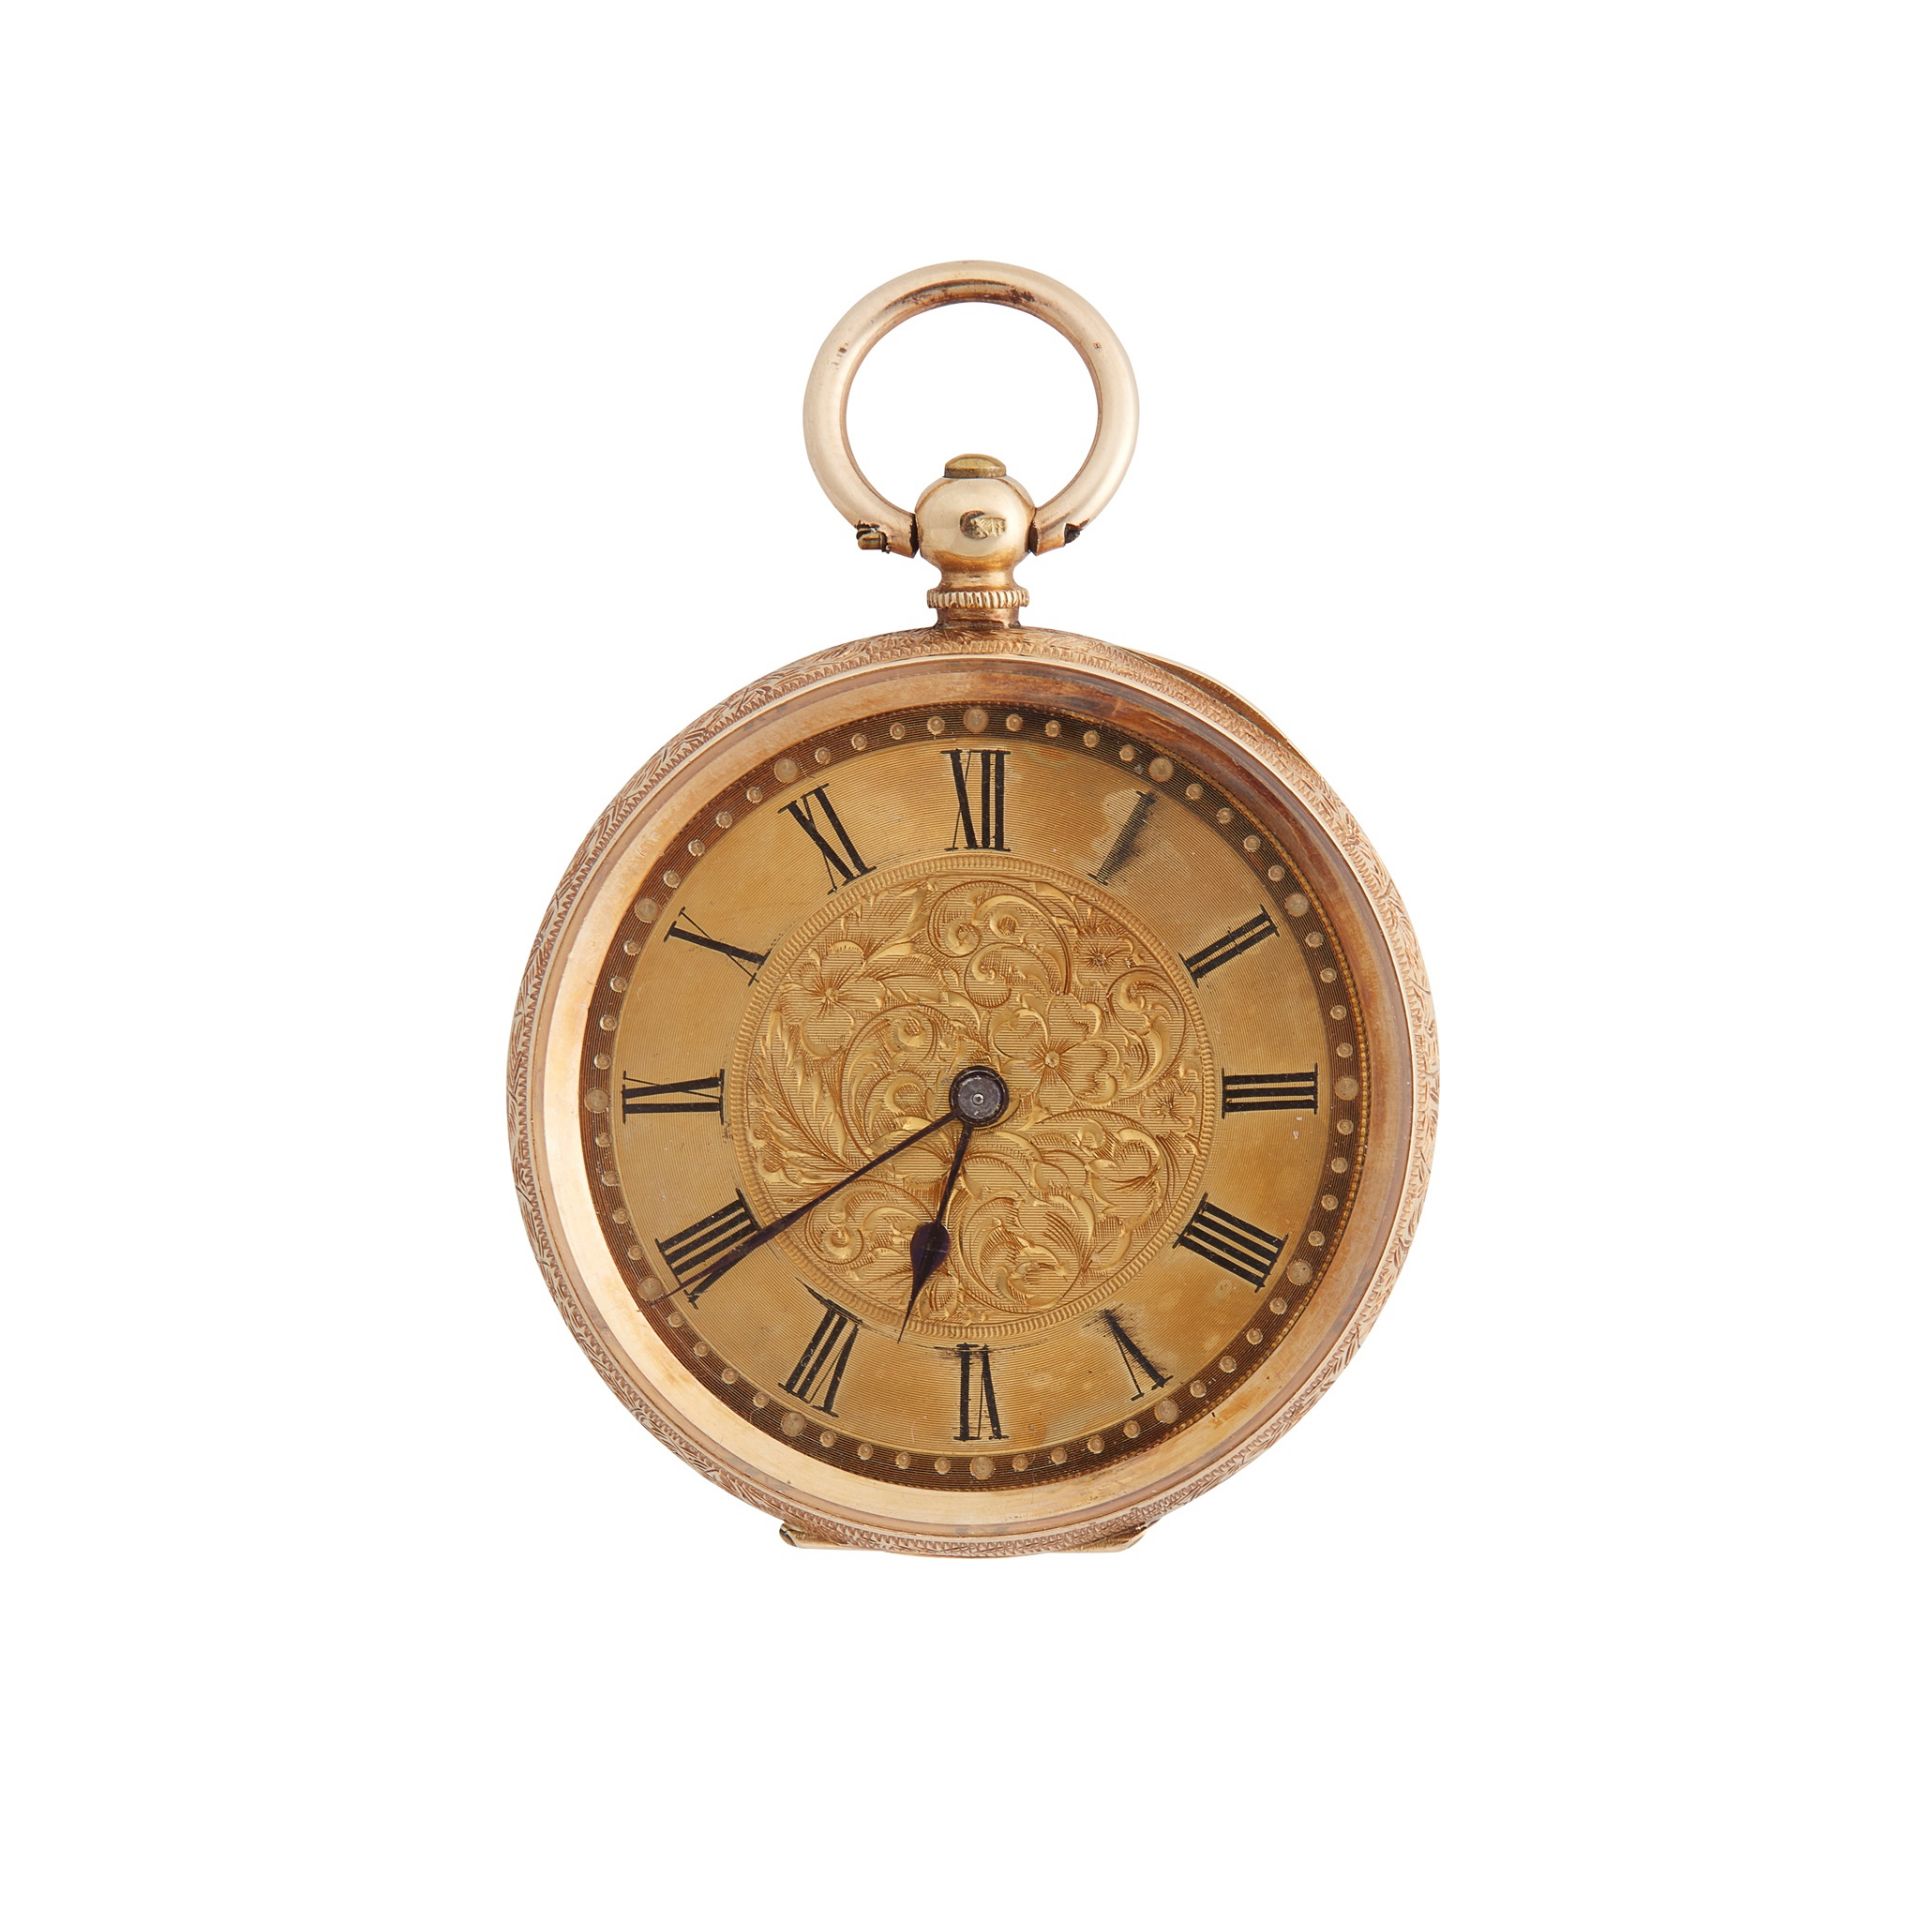 A gold fob watch